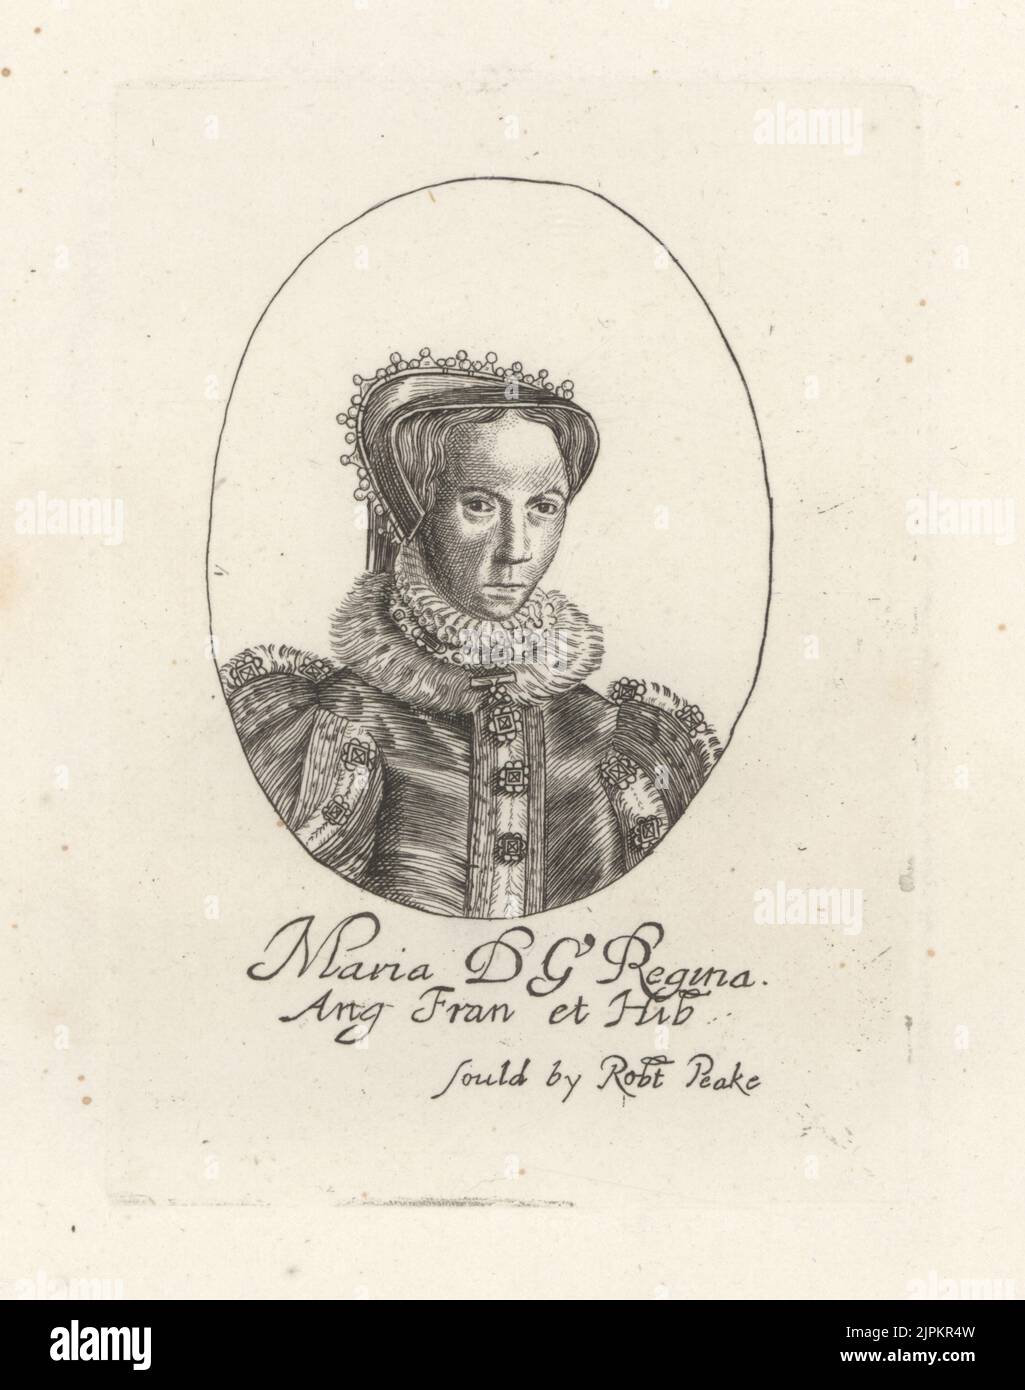 Mary I, Mary Tudor or Bloody Mary, Queen of England, 1516-1558. In French hood, ruff collar, bejeweled gown trimmed with fur. Maria DG Regina Ang Fran et Hib. From William Faithorne's set of Kings sold by Robert Peake. Copperplate engraving from Samuel Woodburn’s Gallery of Rare Portraits Consisting of Original Plates, George Jones, 102 St Martin’s Lane, London, 1816. Stock Photo